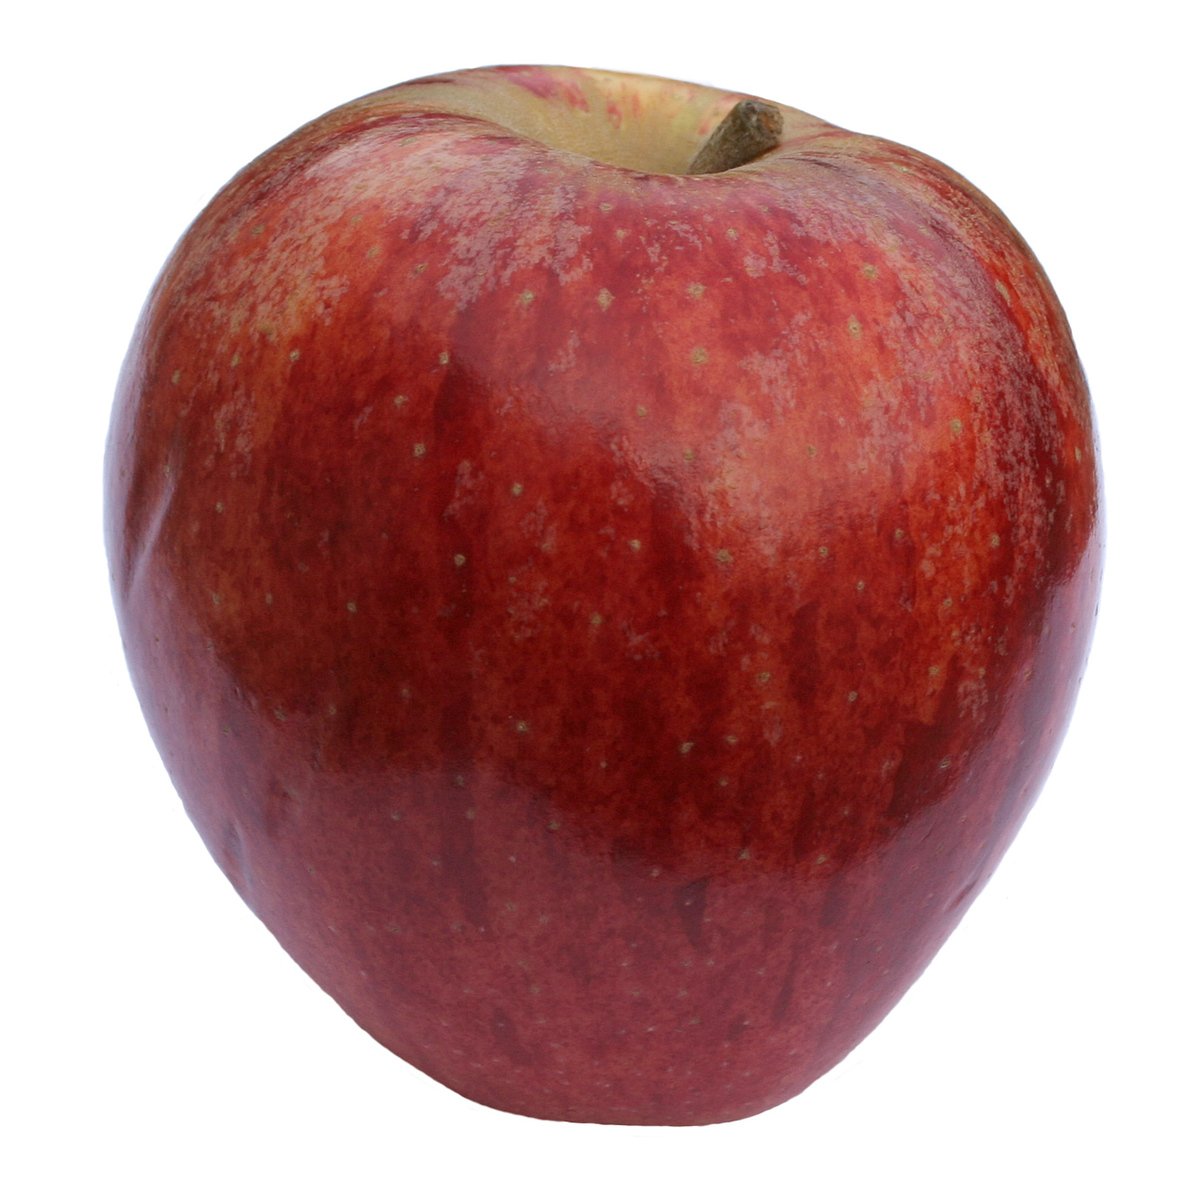 a big red apple with some dirt on it